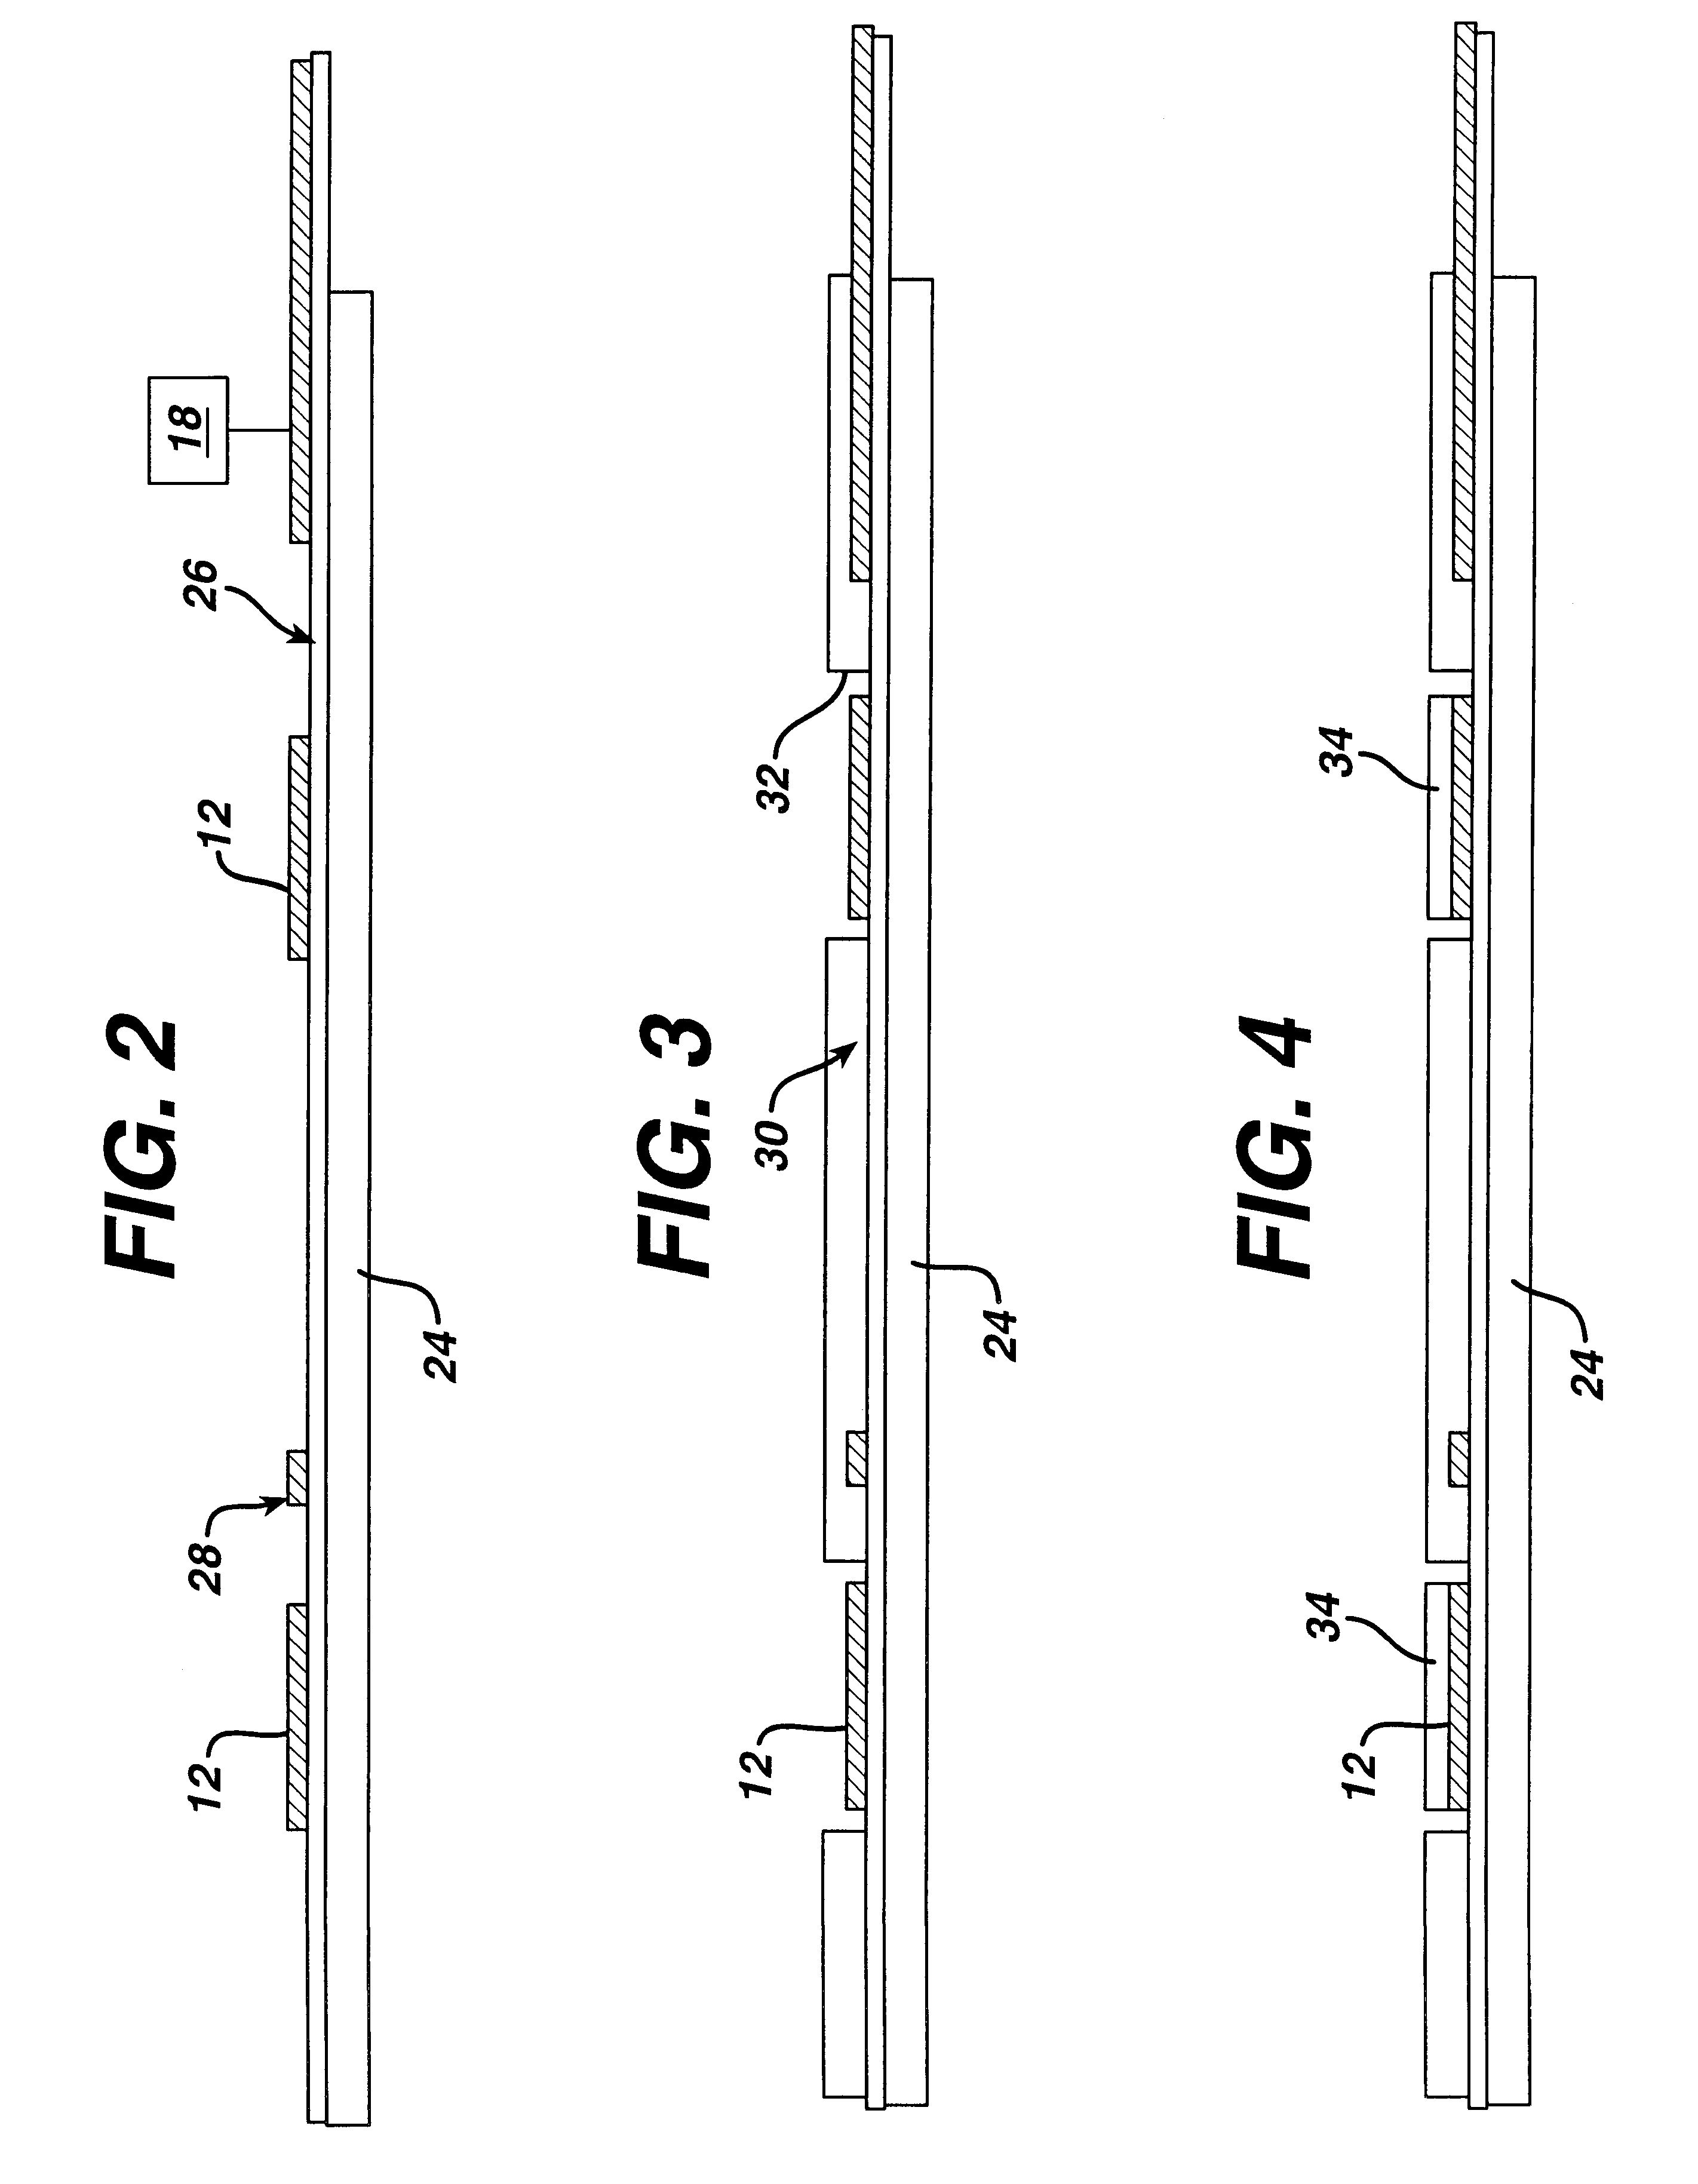 Multiple electrode assembly with extendible electrodes and methods of fabrication and application